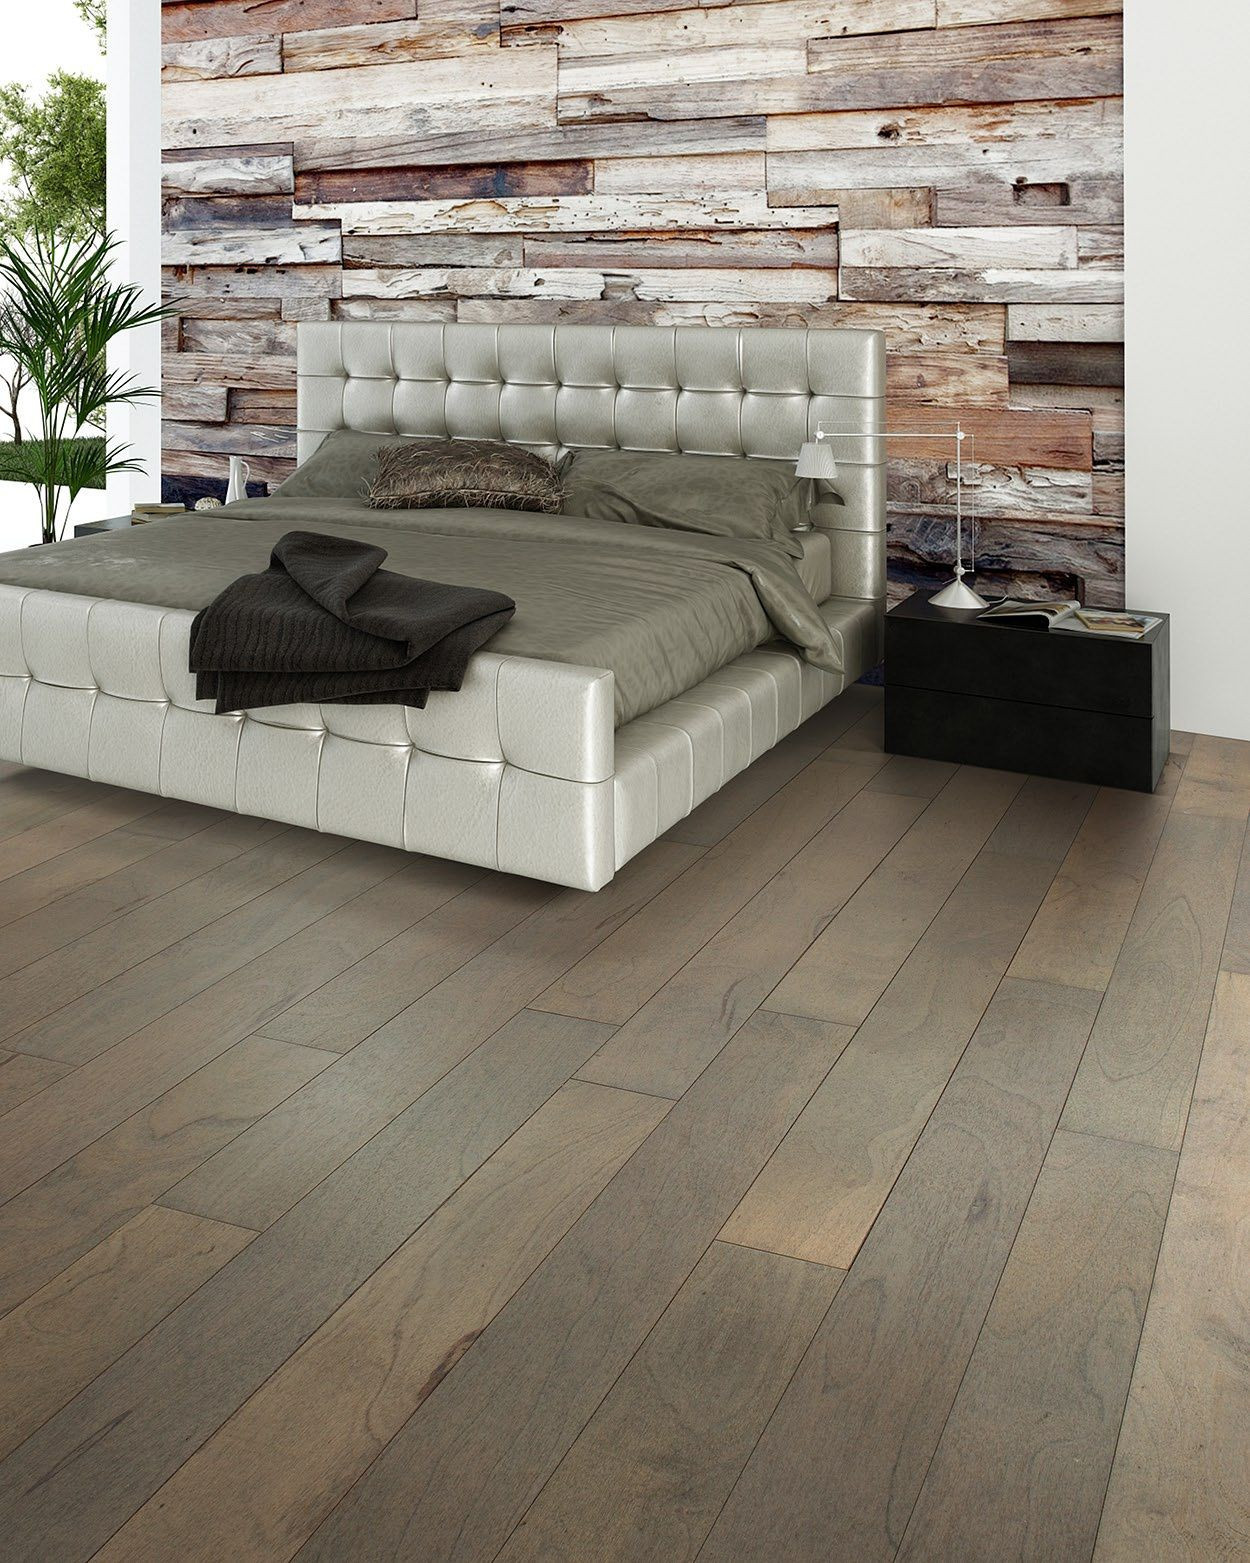 13 Great Fsc Hardwood Flooring 2024 free download fsc hardwood flooring of flooring companies 50 new hardwood flooring contractors graphics 50 regarding fsc certified distressed and textured by hand covelo canyon at wide casa bonita at 6